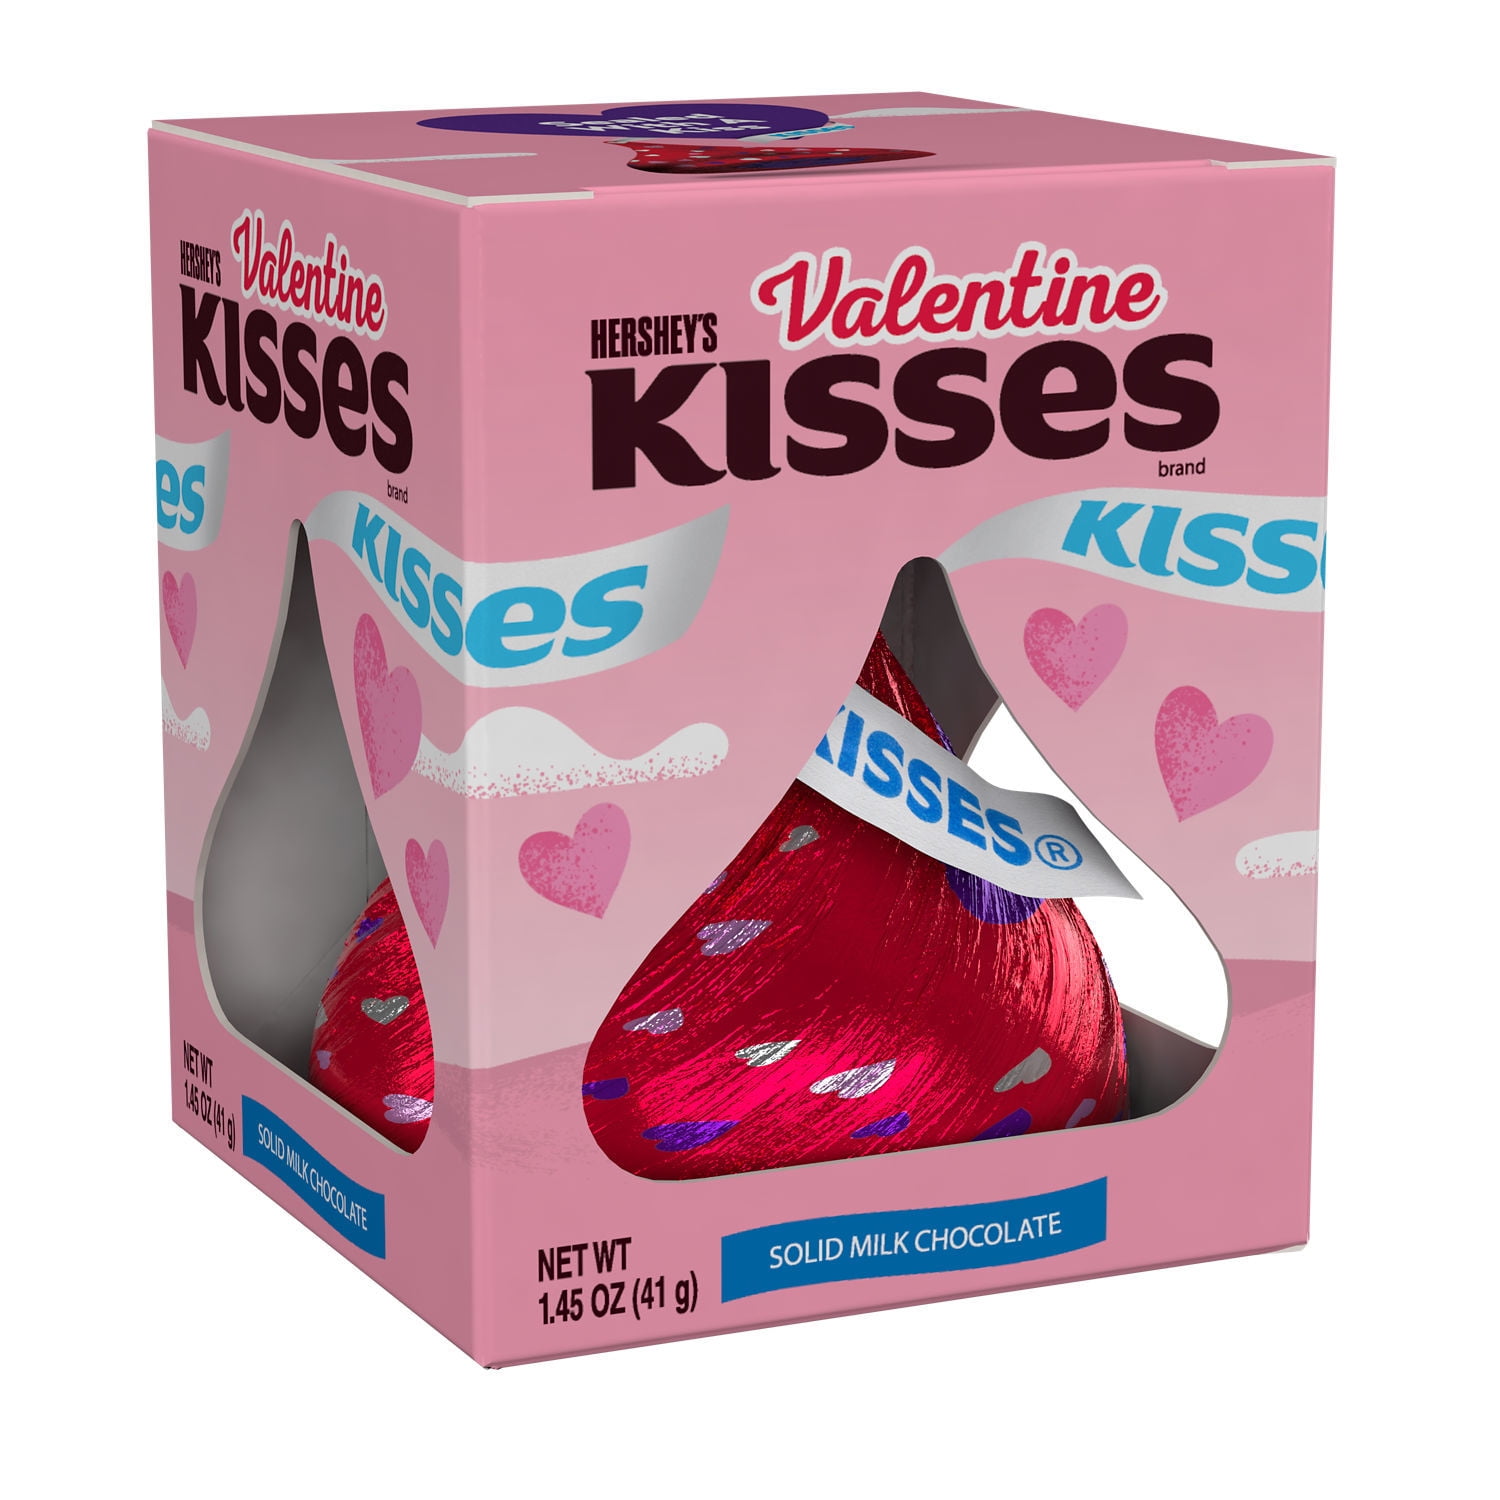 HERSHEY'S, KISSES Solid Milk Chocolate Candy, Valentine's Day, 1.45 oz, Gift Box